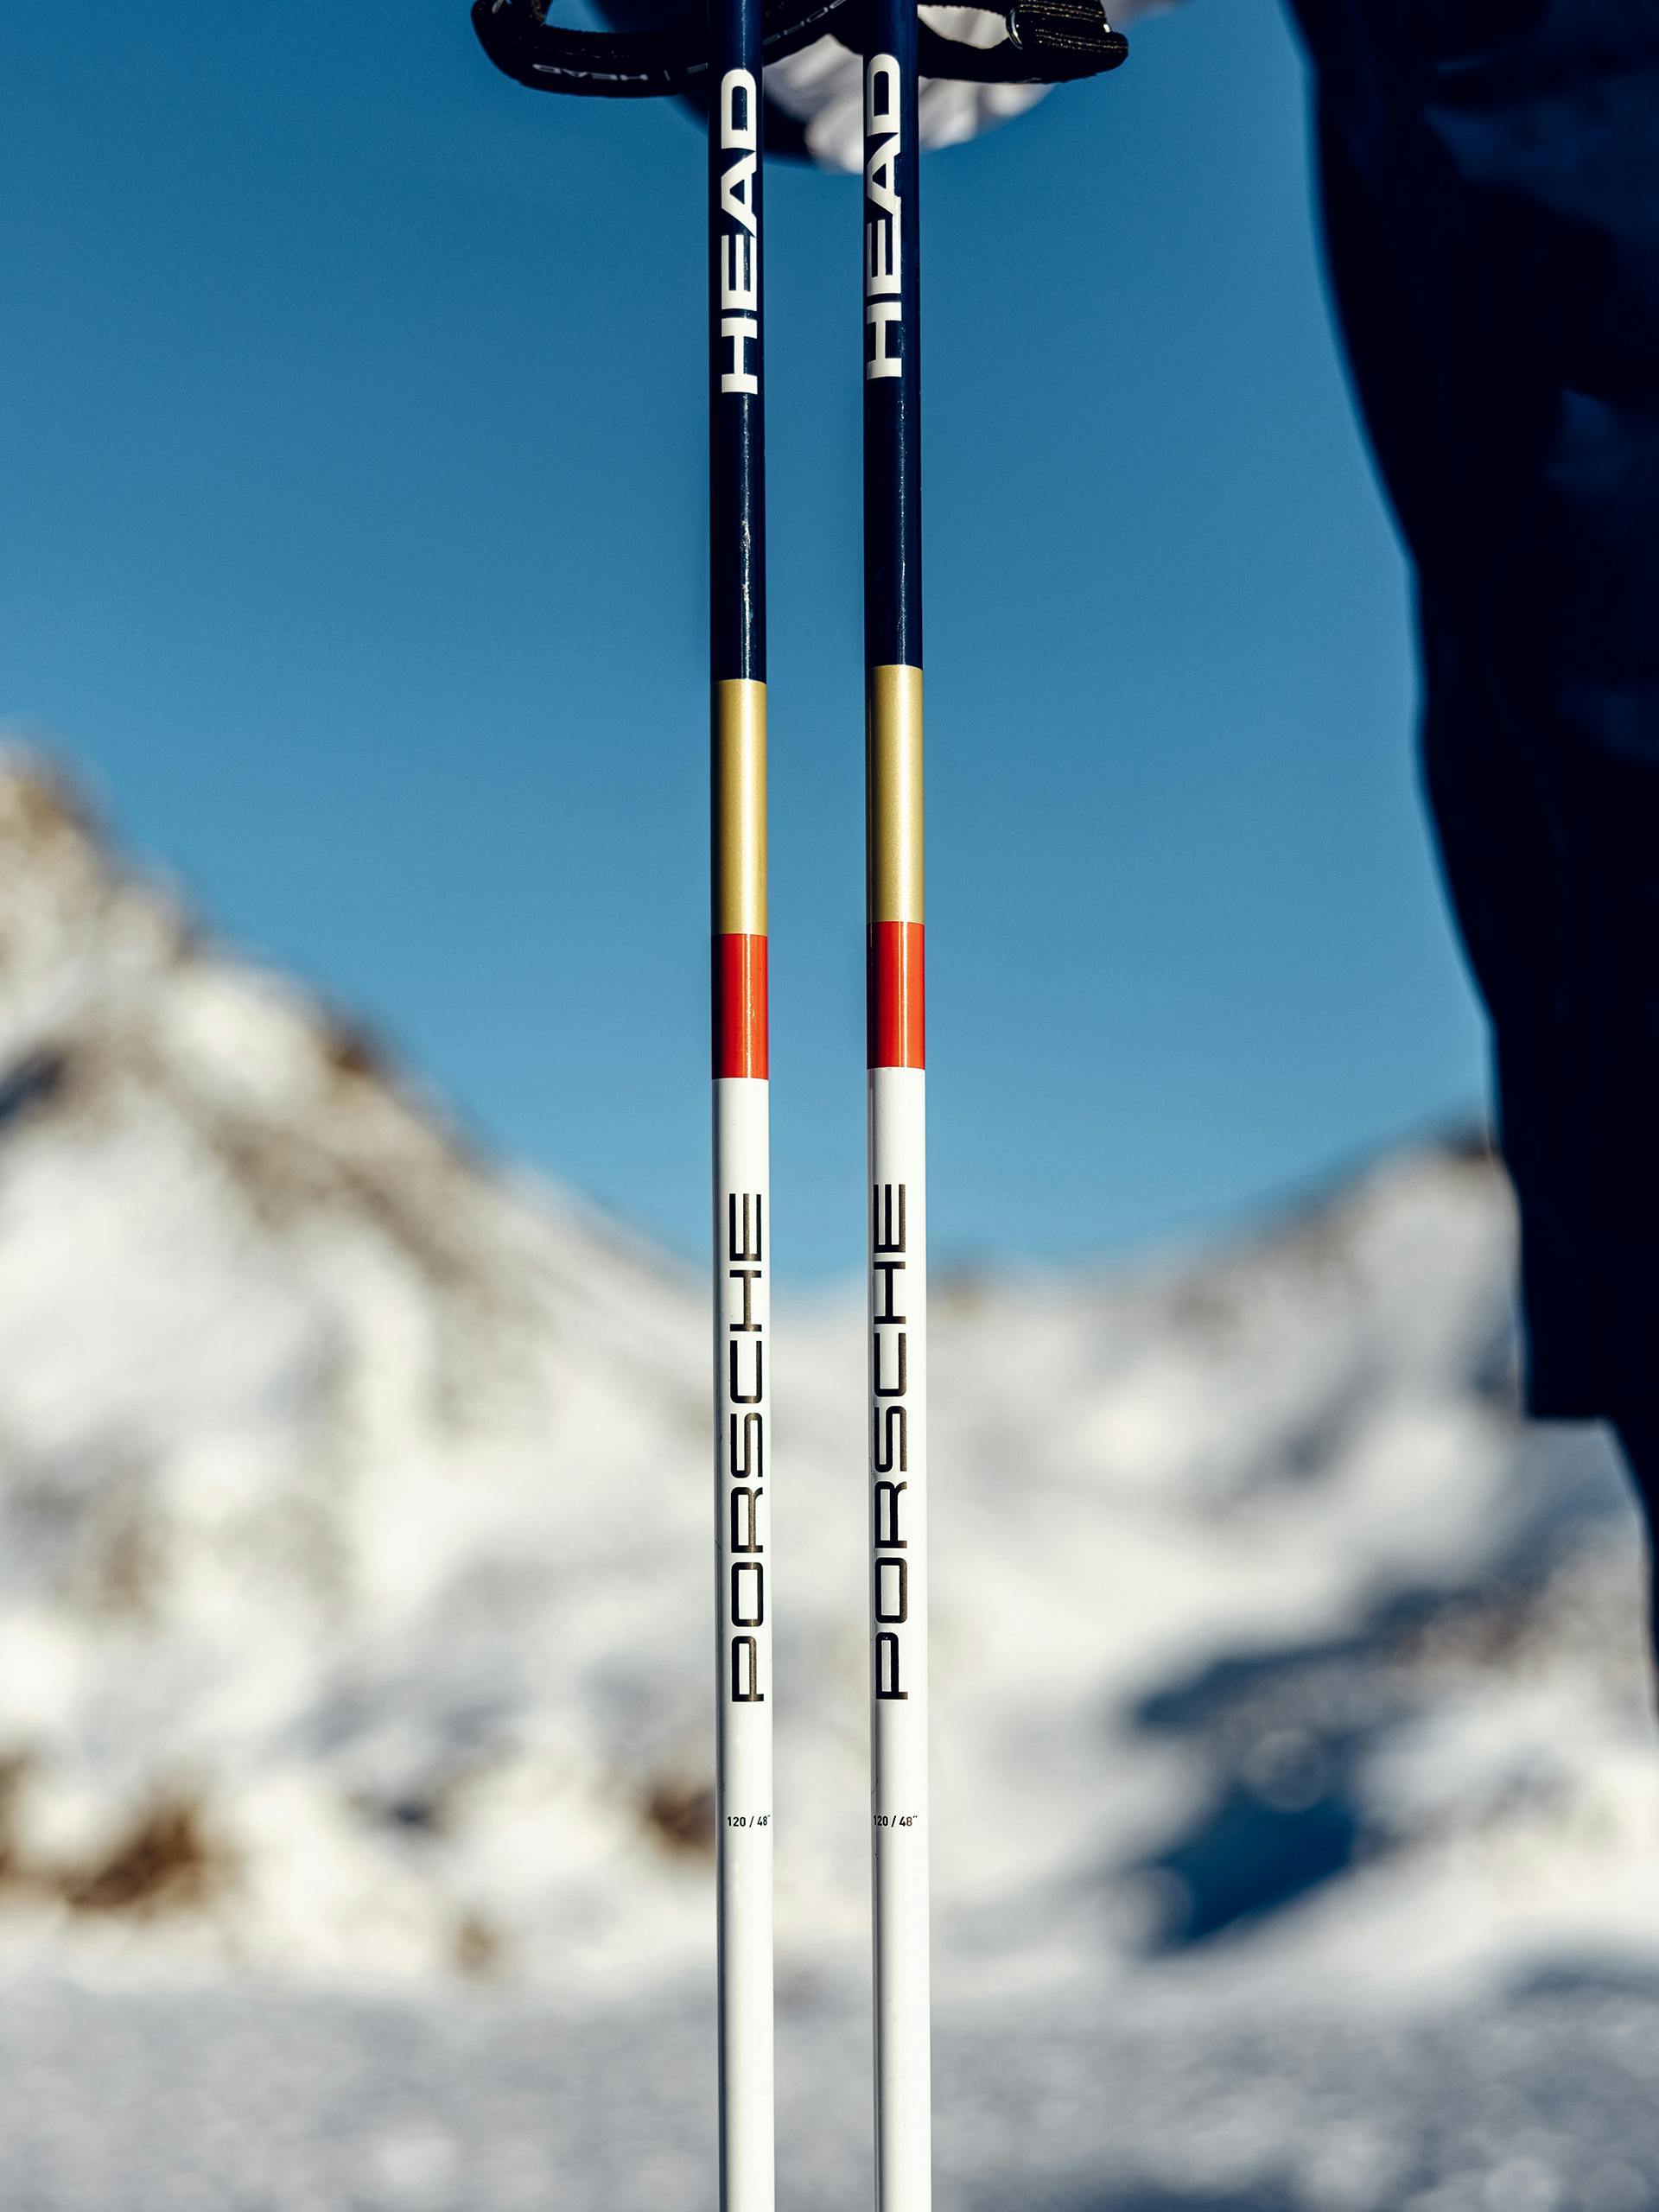 Close up image of the new Porsche HEAD Dakar Carbon Ski Poles with blue sky and mountains in the background.